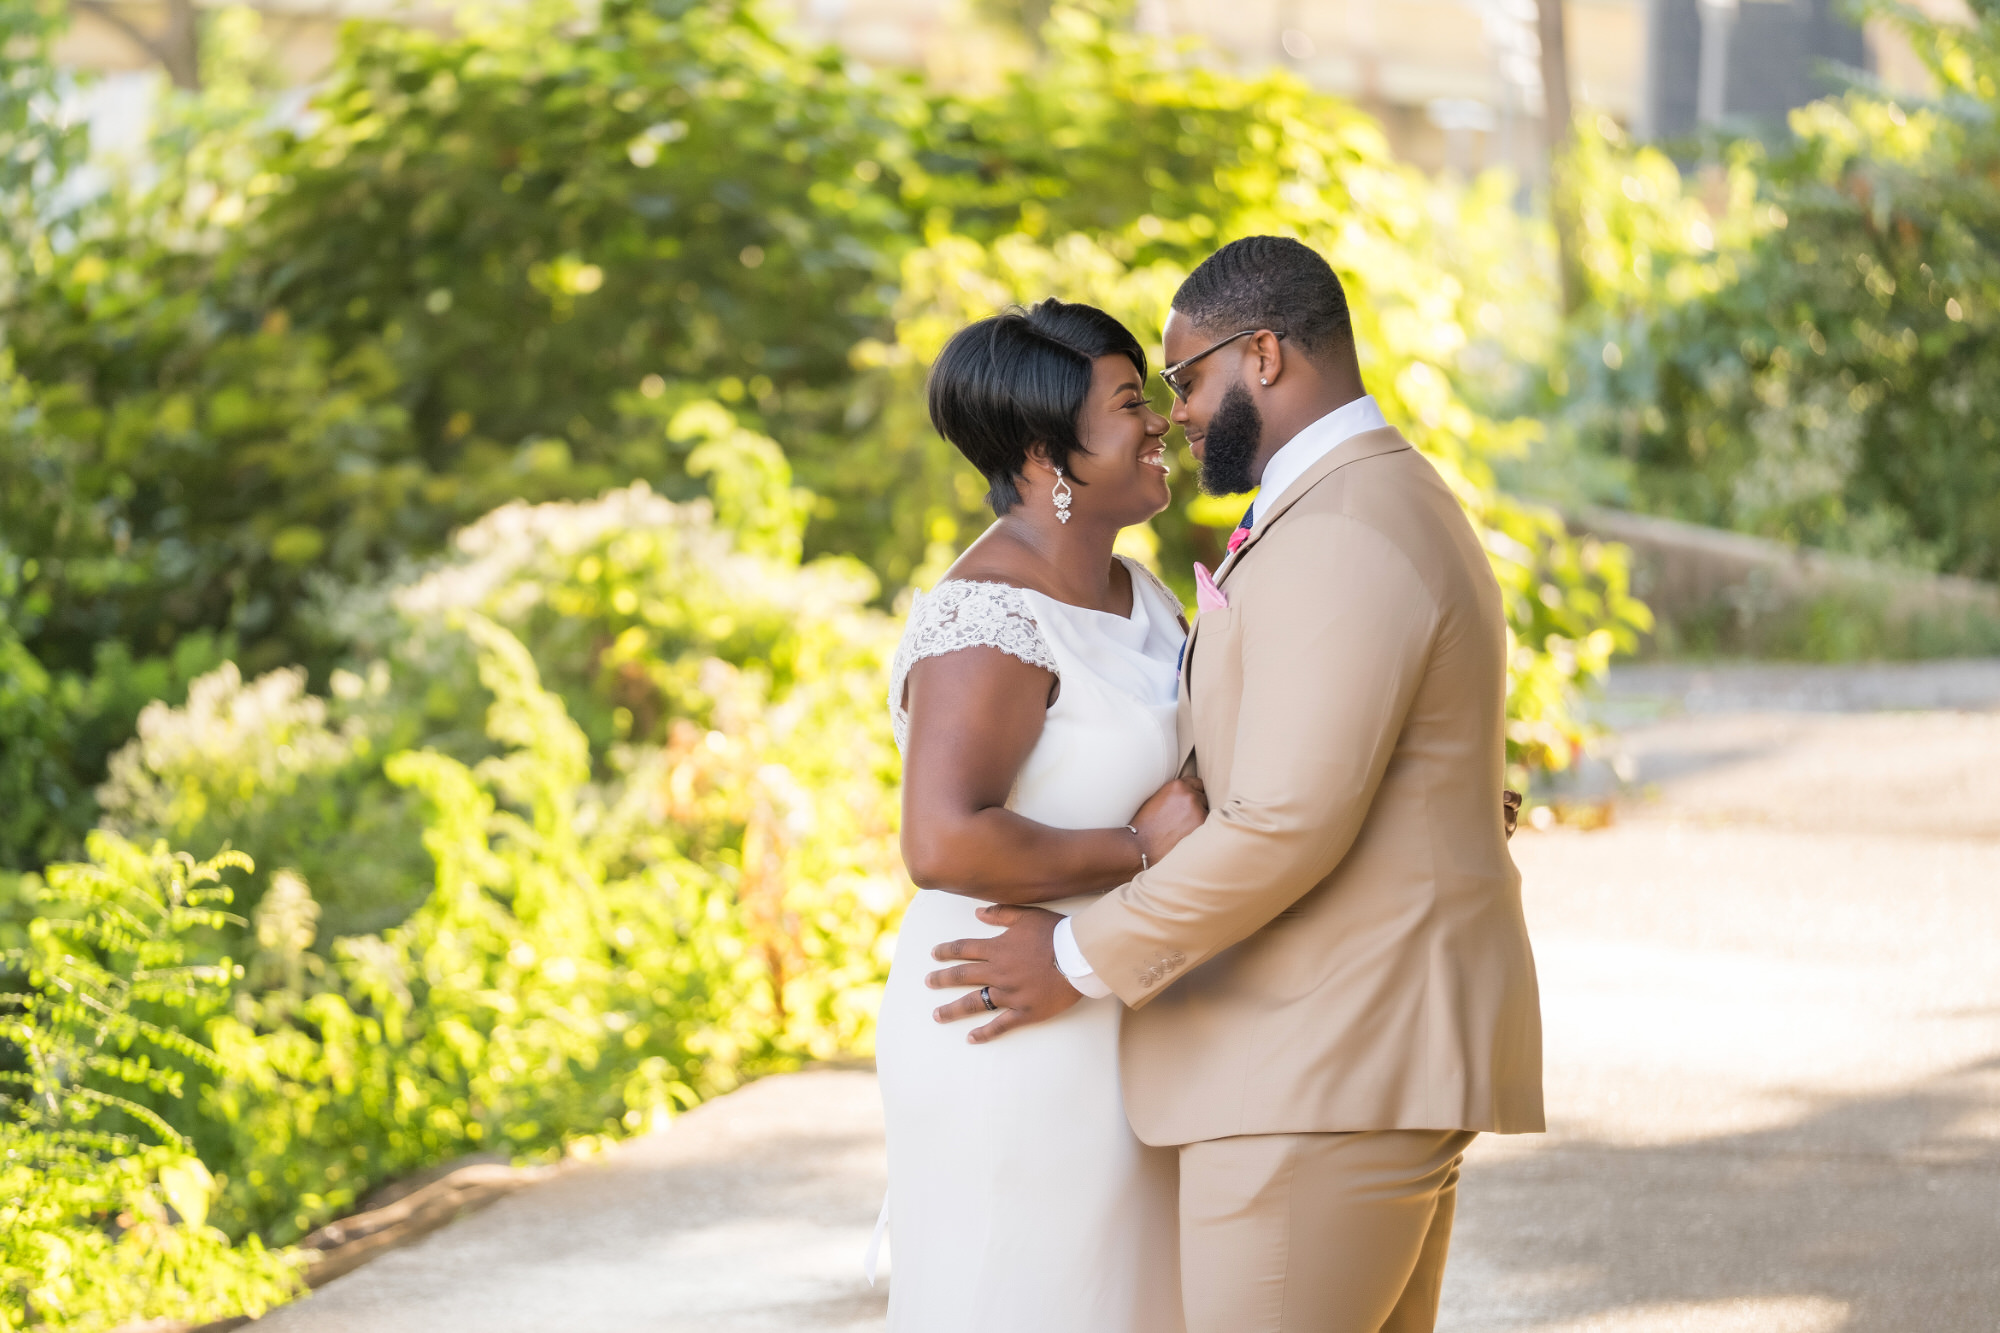 small pittsburgh elopement photography • Small Weddings